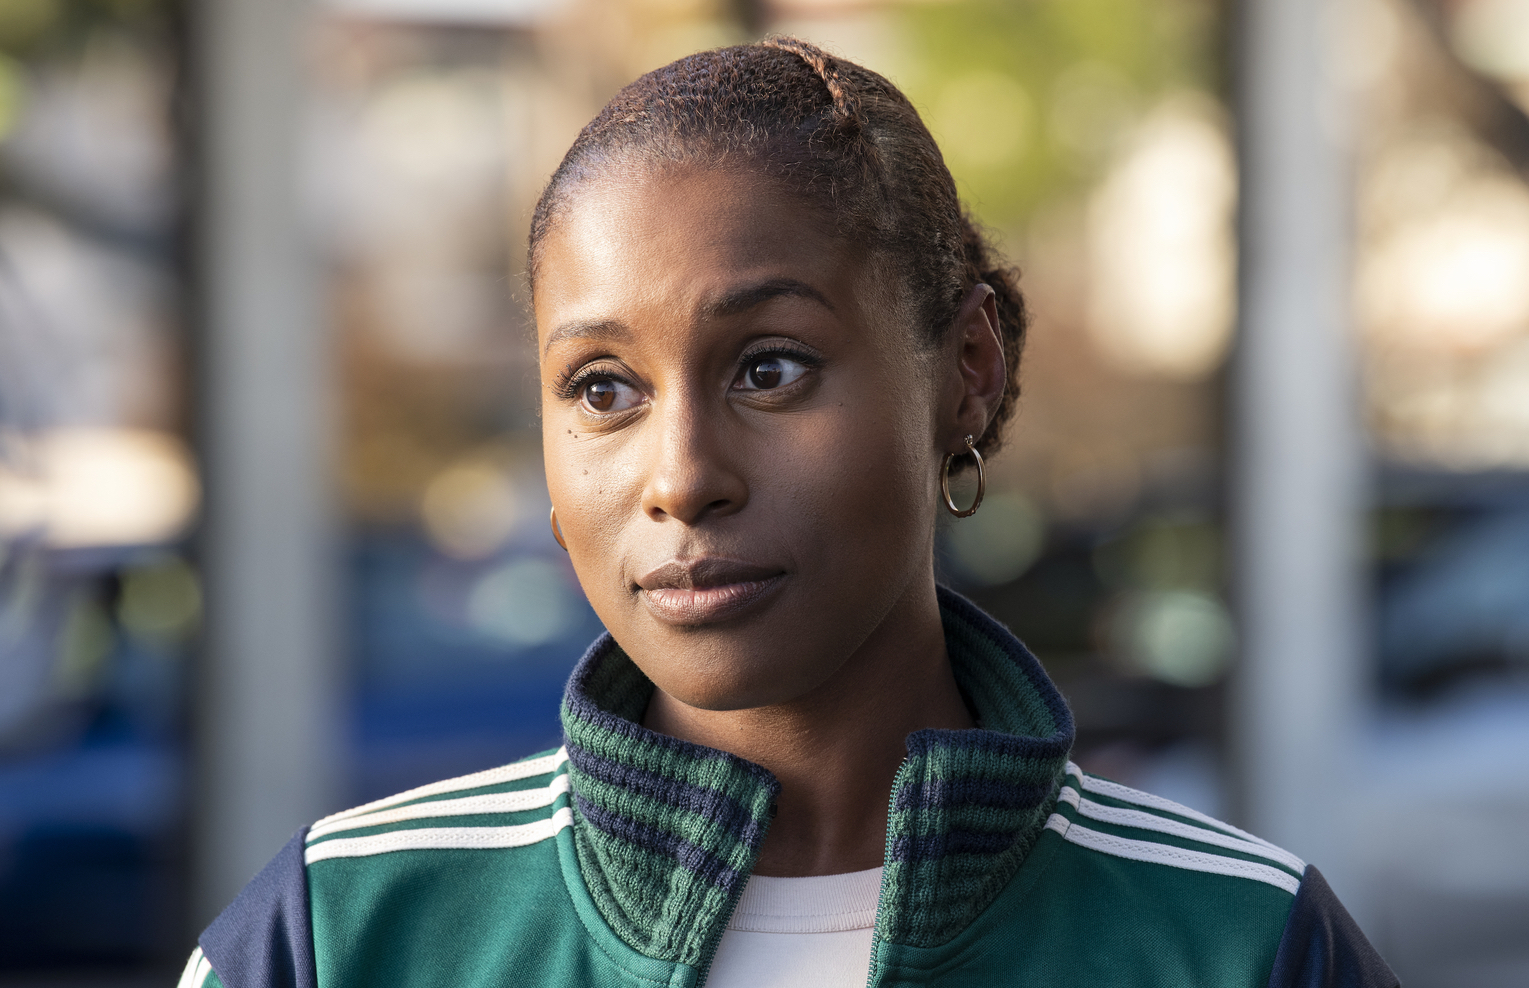 Twitter Reacts To Issa & Lawrence Breaking Up In Insecure Season 5 Premiere